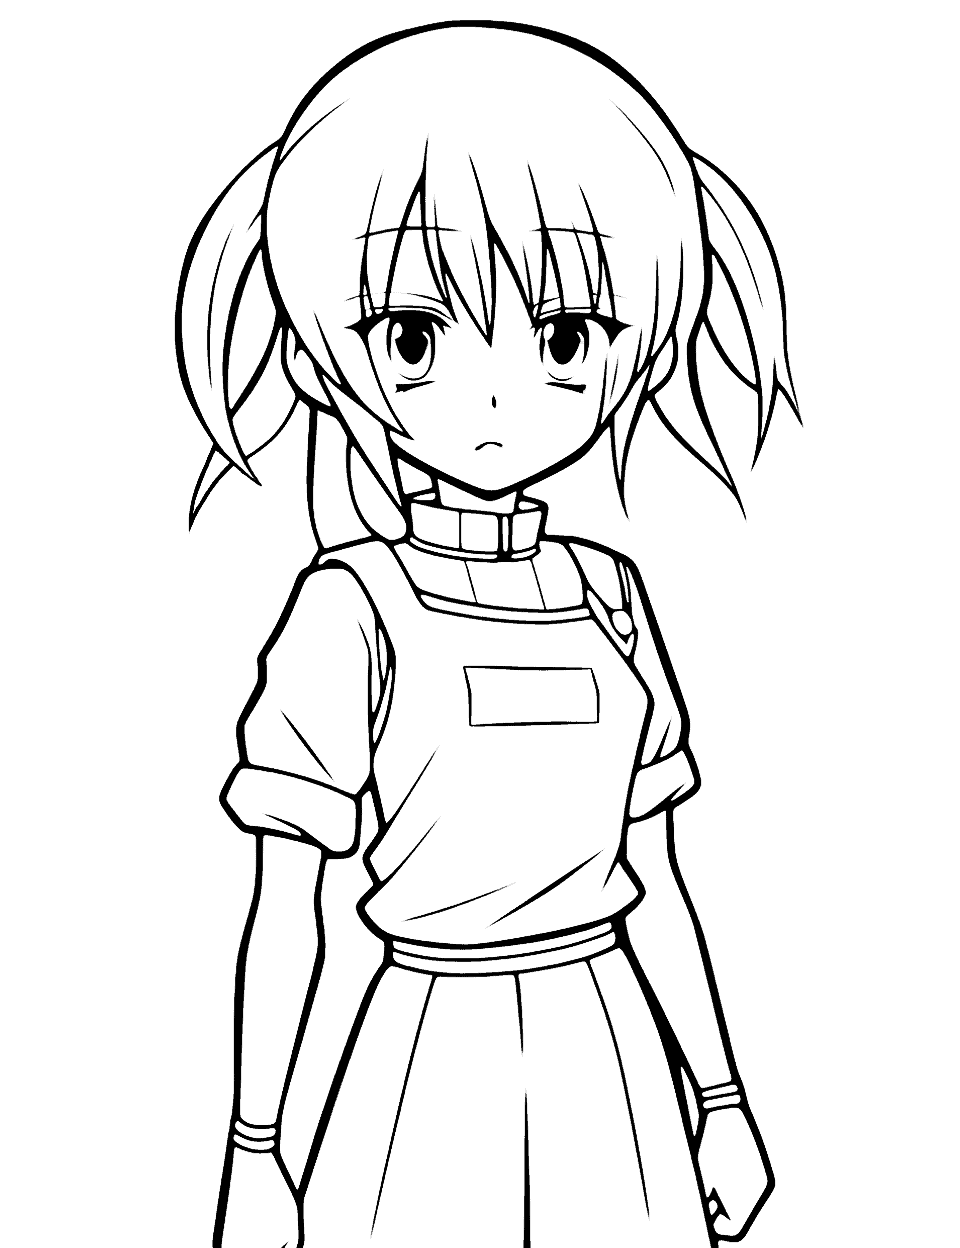 Sad Anime Girl Coloring Page - A sad anime girl, shedding a tear, providing an opportunity to discuss emotions with children.